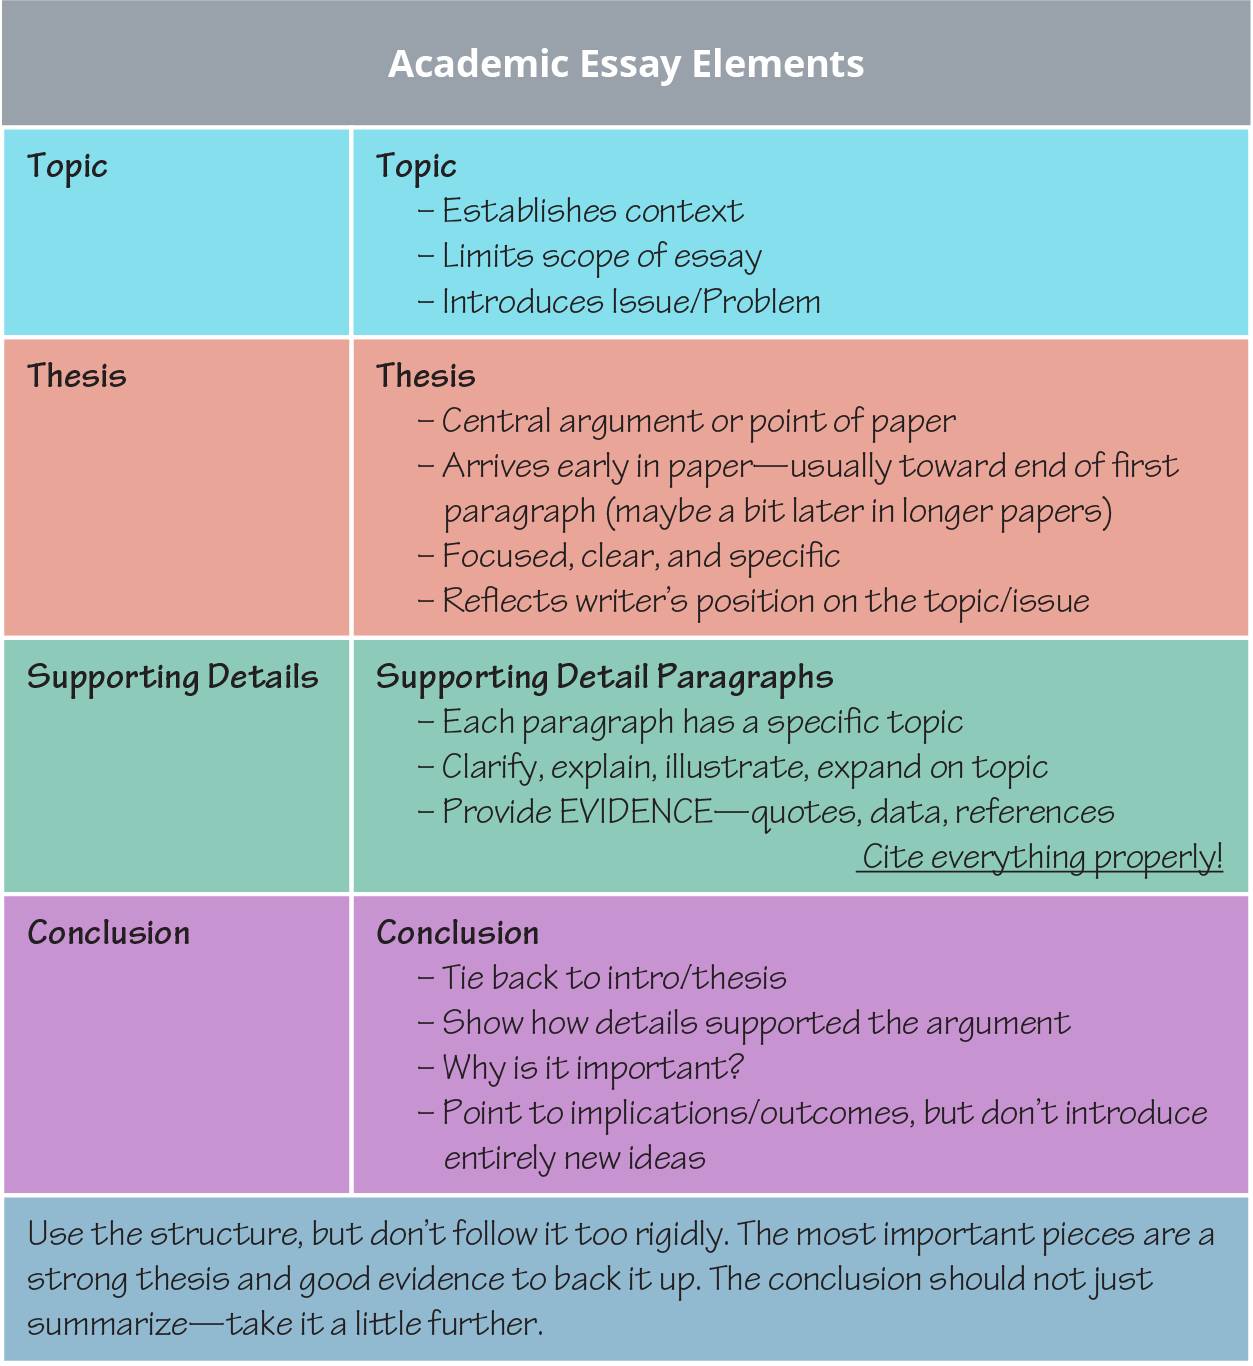 Table of the elements of an academic essay